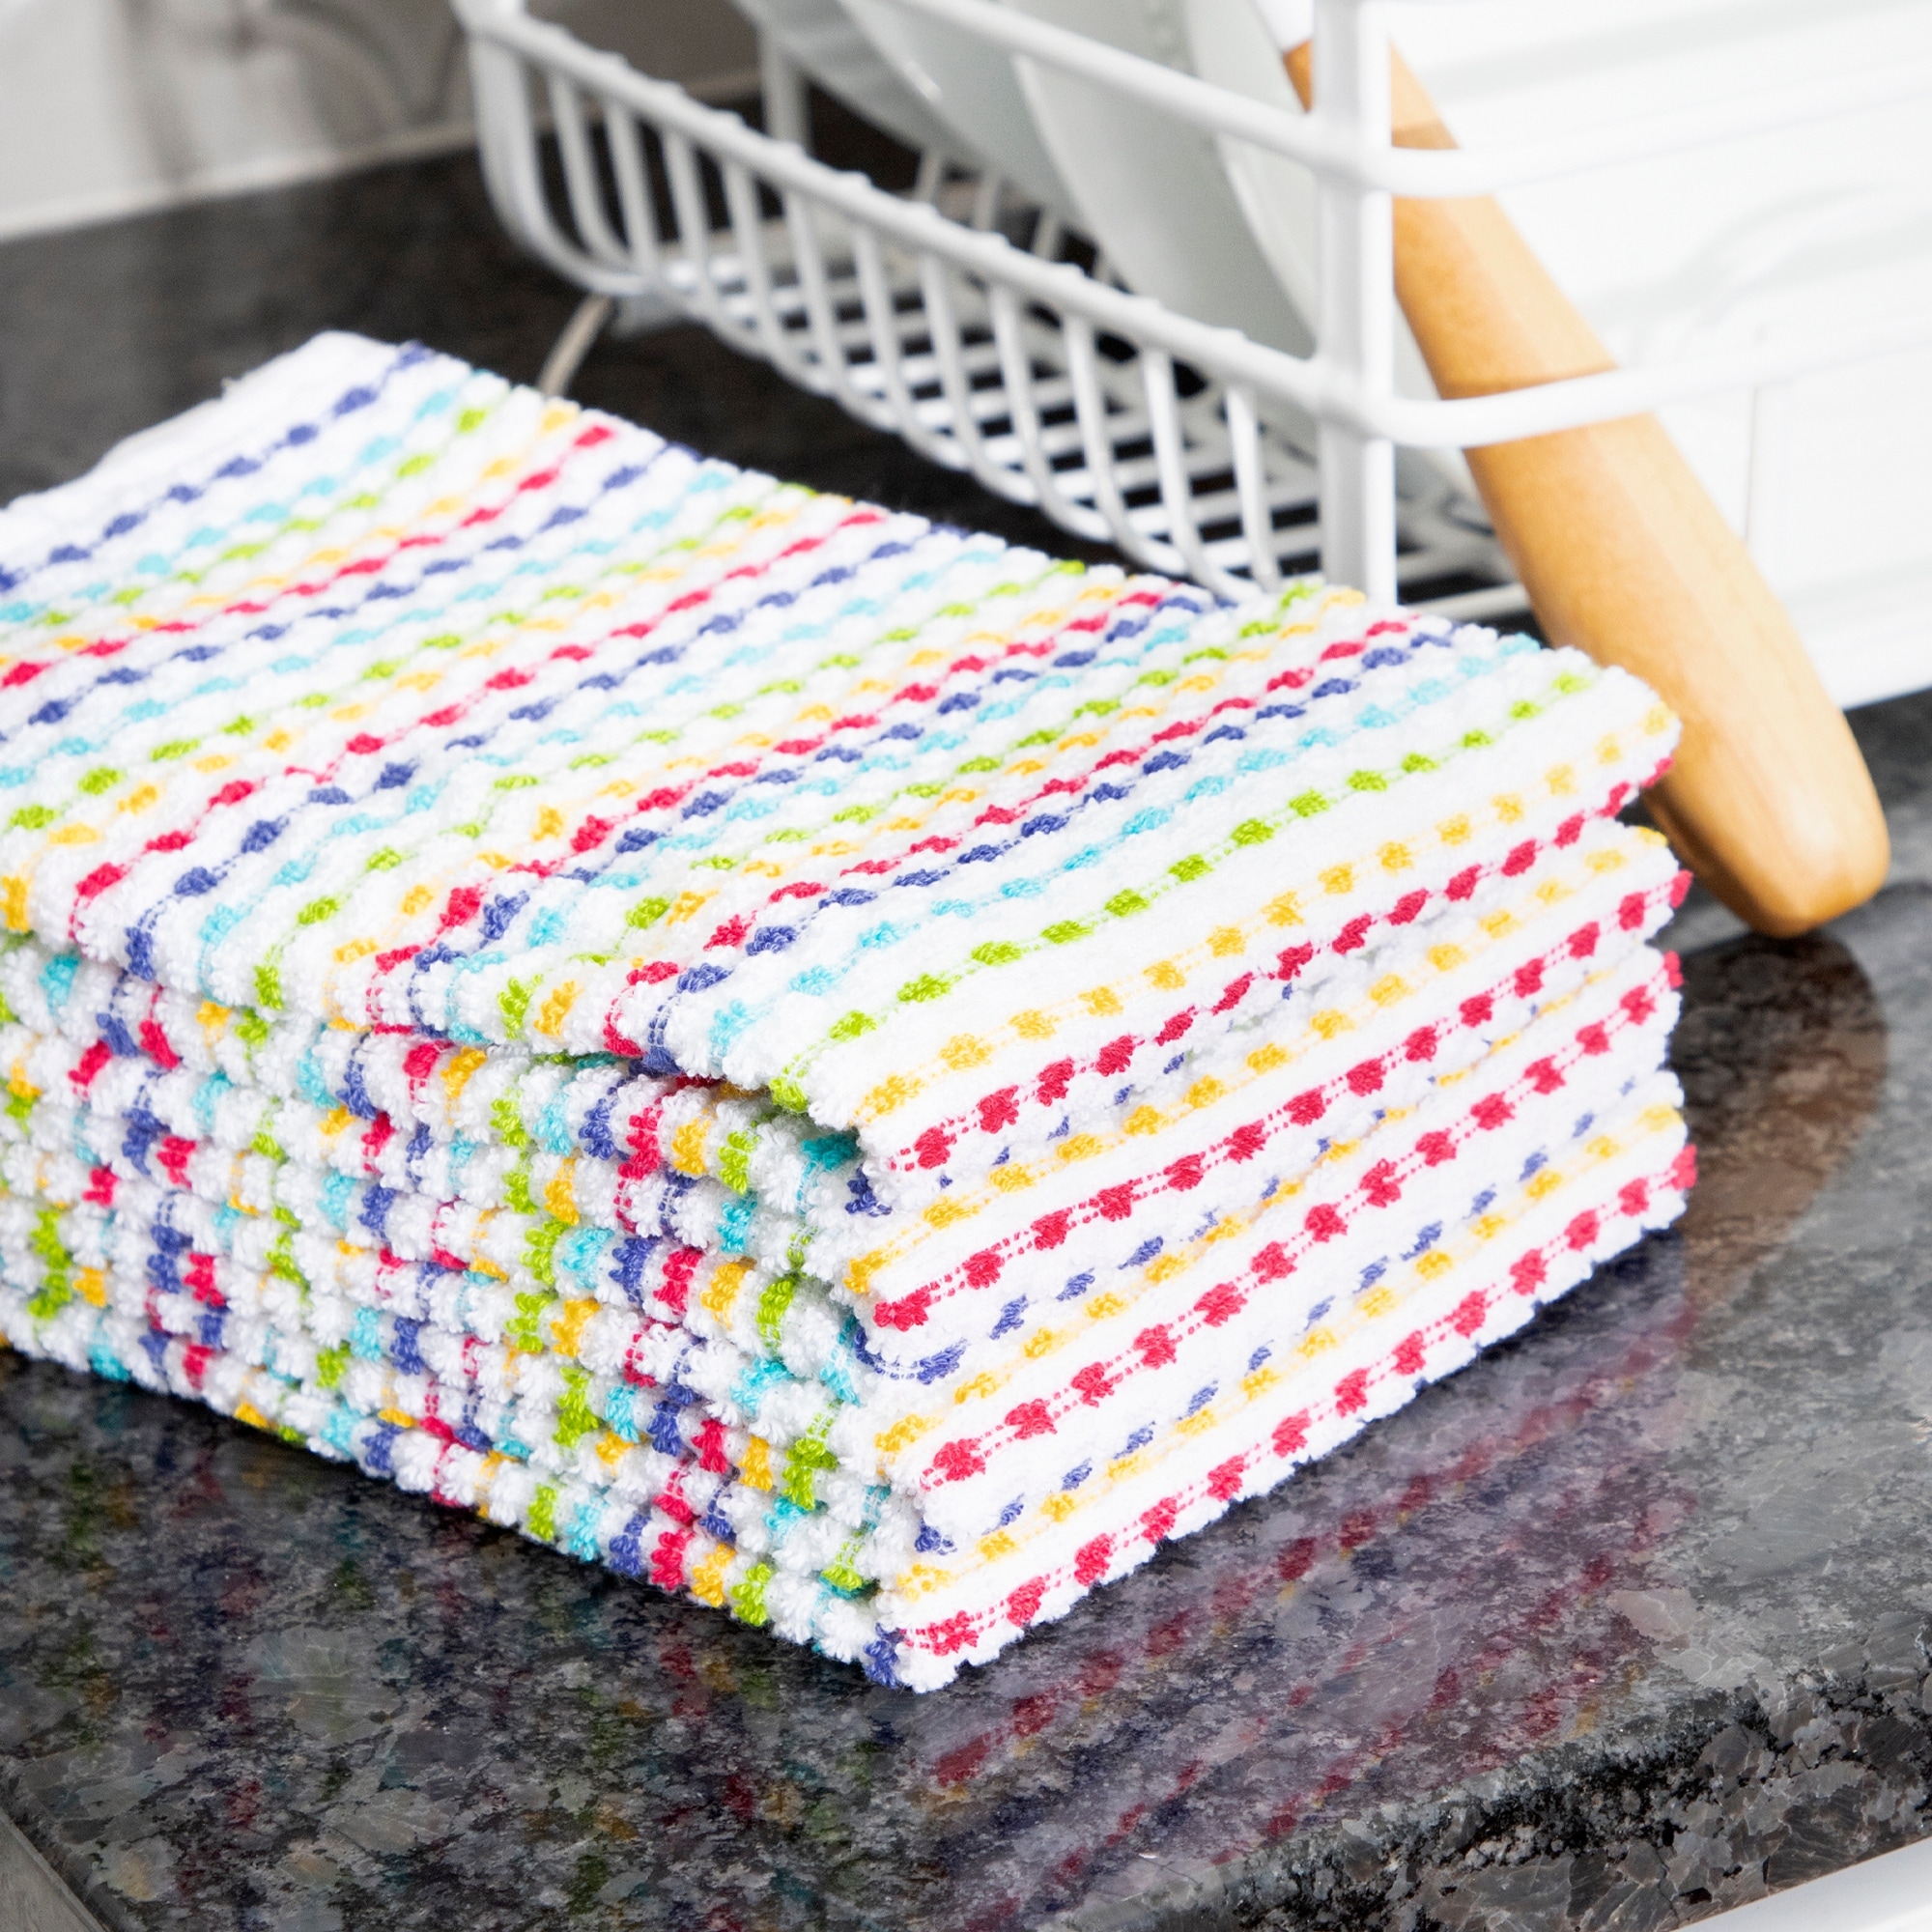 https://ak1.ostkcdn.com/images/products/is/images/direct/d693f96f2b2e39c23d6f157b07b40f3a6bf197f3/RITZ-Pebble-Cotton-Terry-Bar-Mop-Kitchen-Towel%2C-4-Piece-Set.jpg